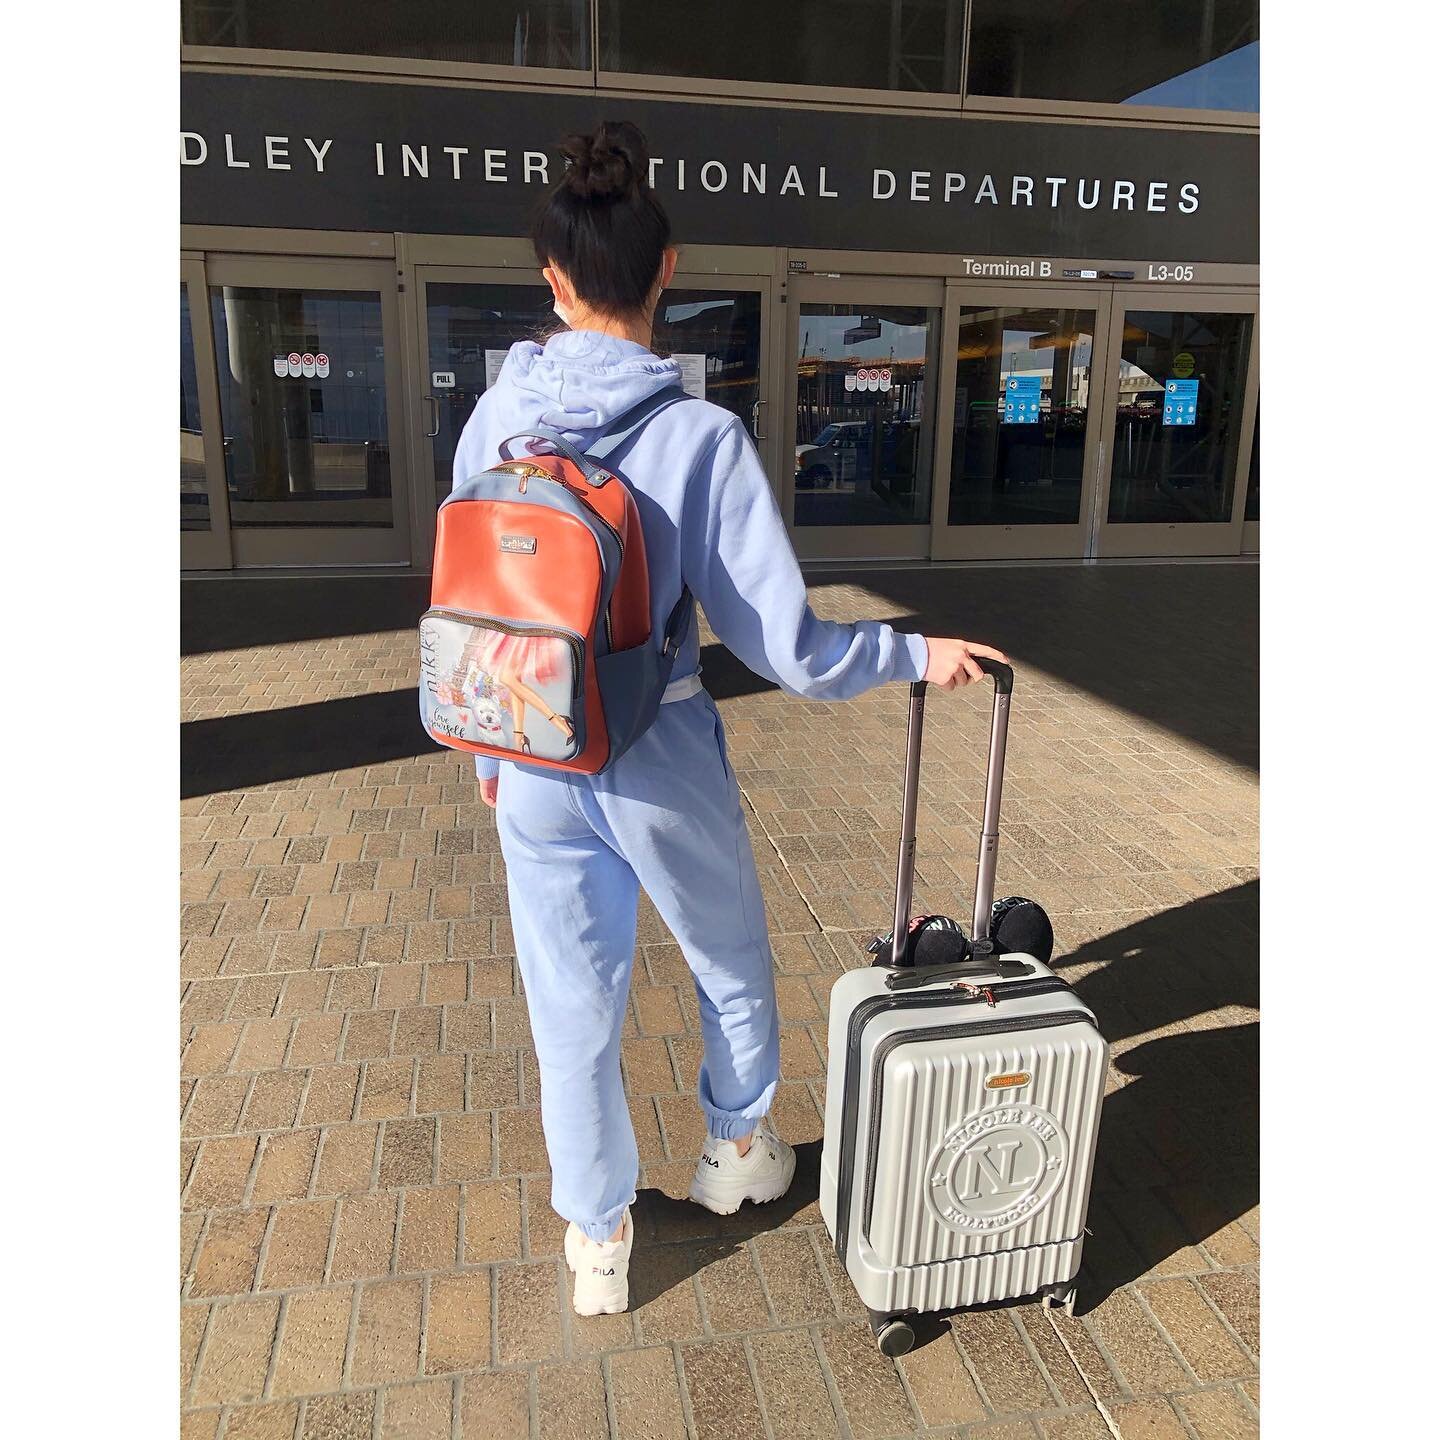 The Nikky backpack will be the perfect bag to take all your essentials on your next trip!🏖🛫🥰 Visit our official website nicoleleeusa.com/nl-stores to find your nearest distributor to shop our new arrivals! To shop directly visit nikkybag.com/new-a